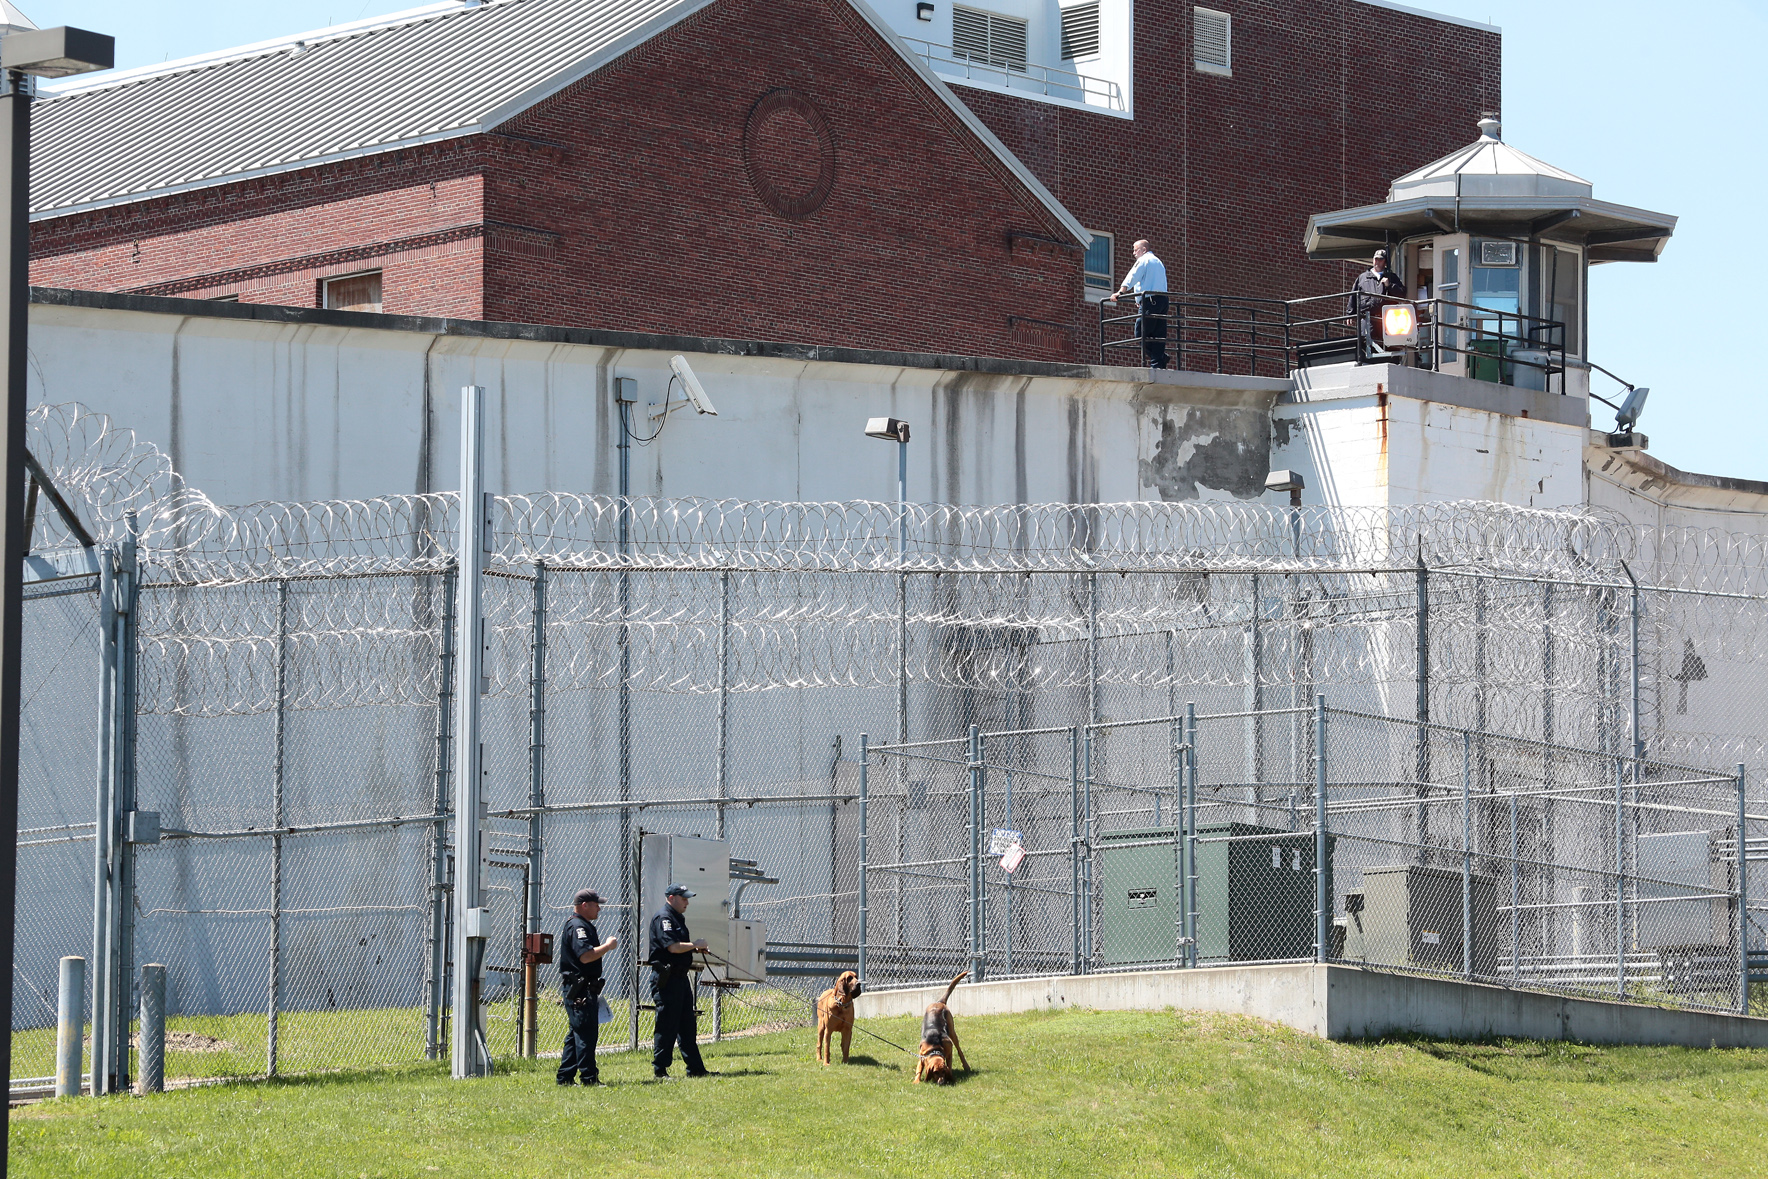 PHOTO: Law enforcement officers with bloodhounds stand guard at one of the entrances to the Clinton Correctional Facility in Dannemora, N.Y. on Saturday, June 6, 2015.